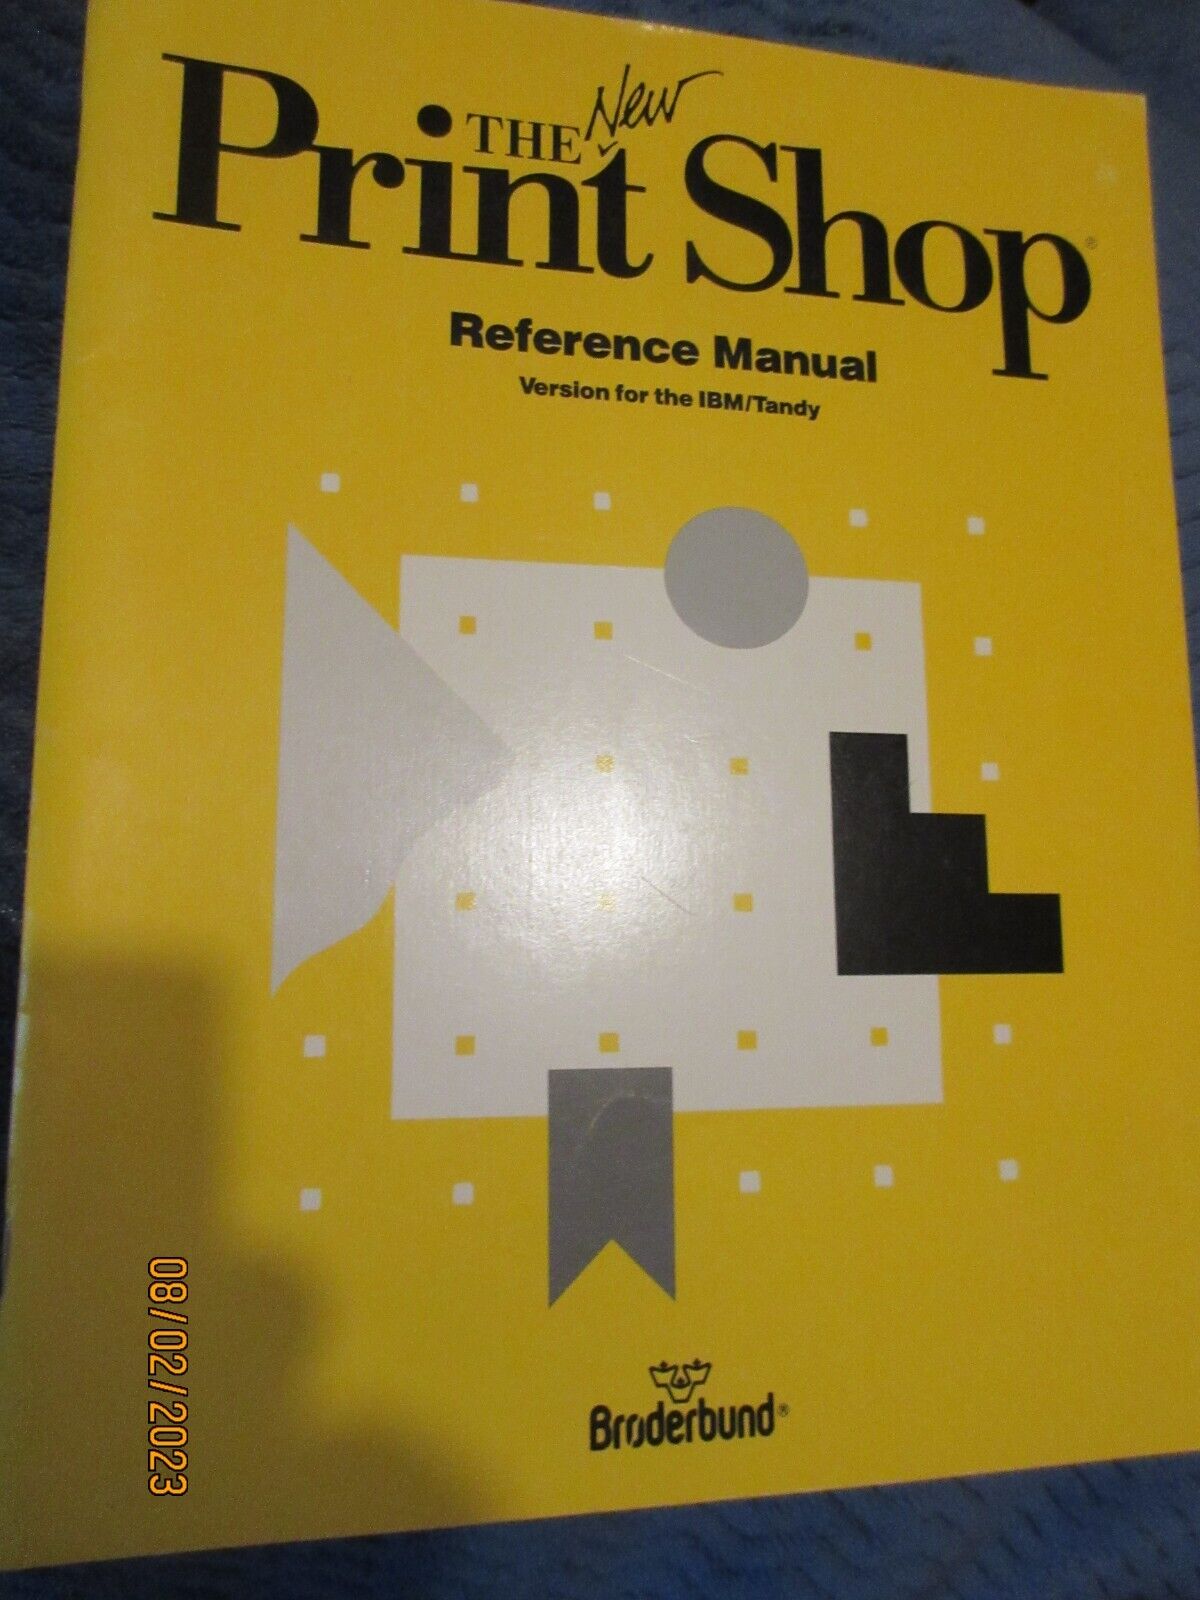 The New Print shop Reference Manual by Broderbund IBM / Tandy Version BOOK ONLY